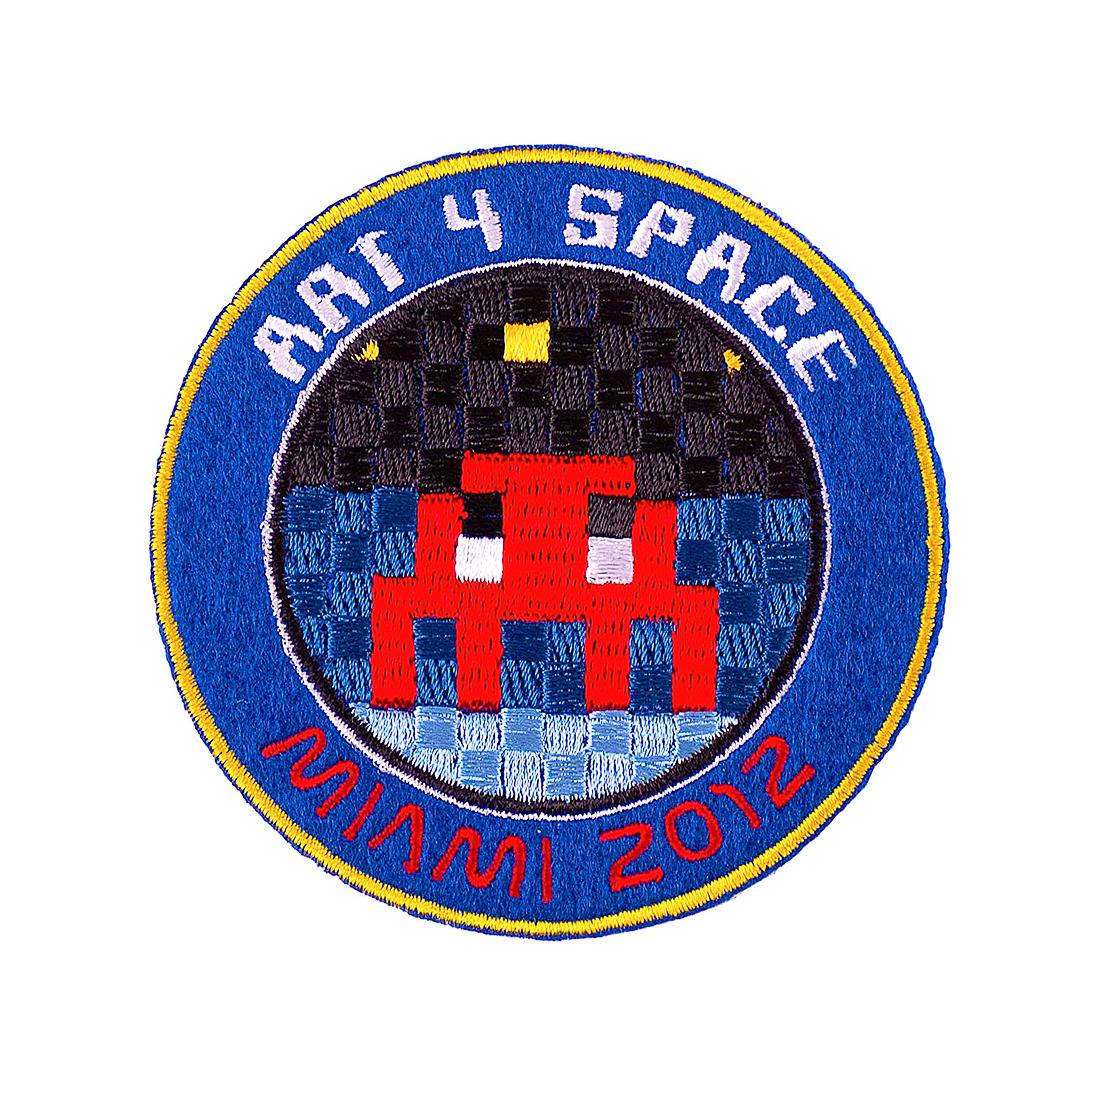 Made in very limited numbers for the Invader Art 4 Space event in 2012.
Invader sent a mosaic into space from Miami on the occasion called Space One.
Text on patch reads “Art 4 Space Miami 2012”.
Patch is new, never used.
Fabric patch, stitched in